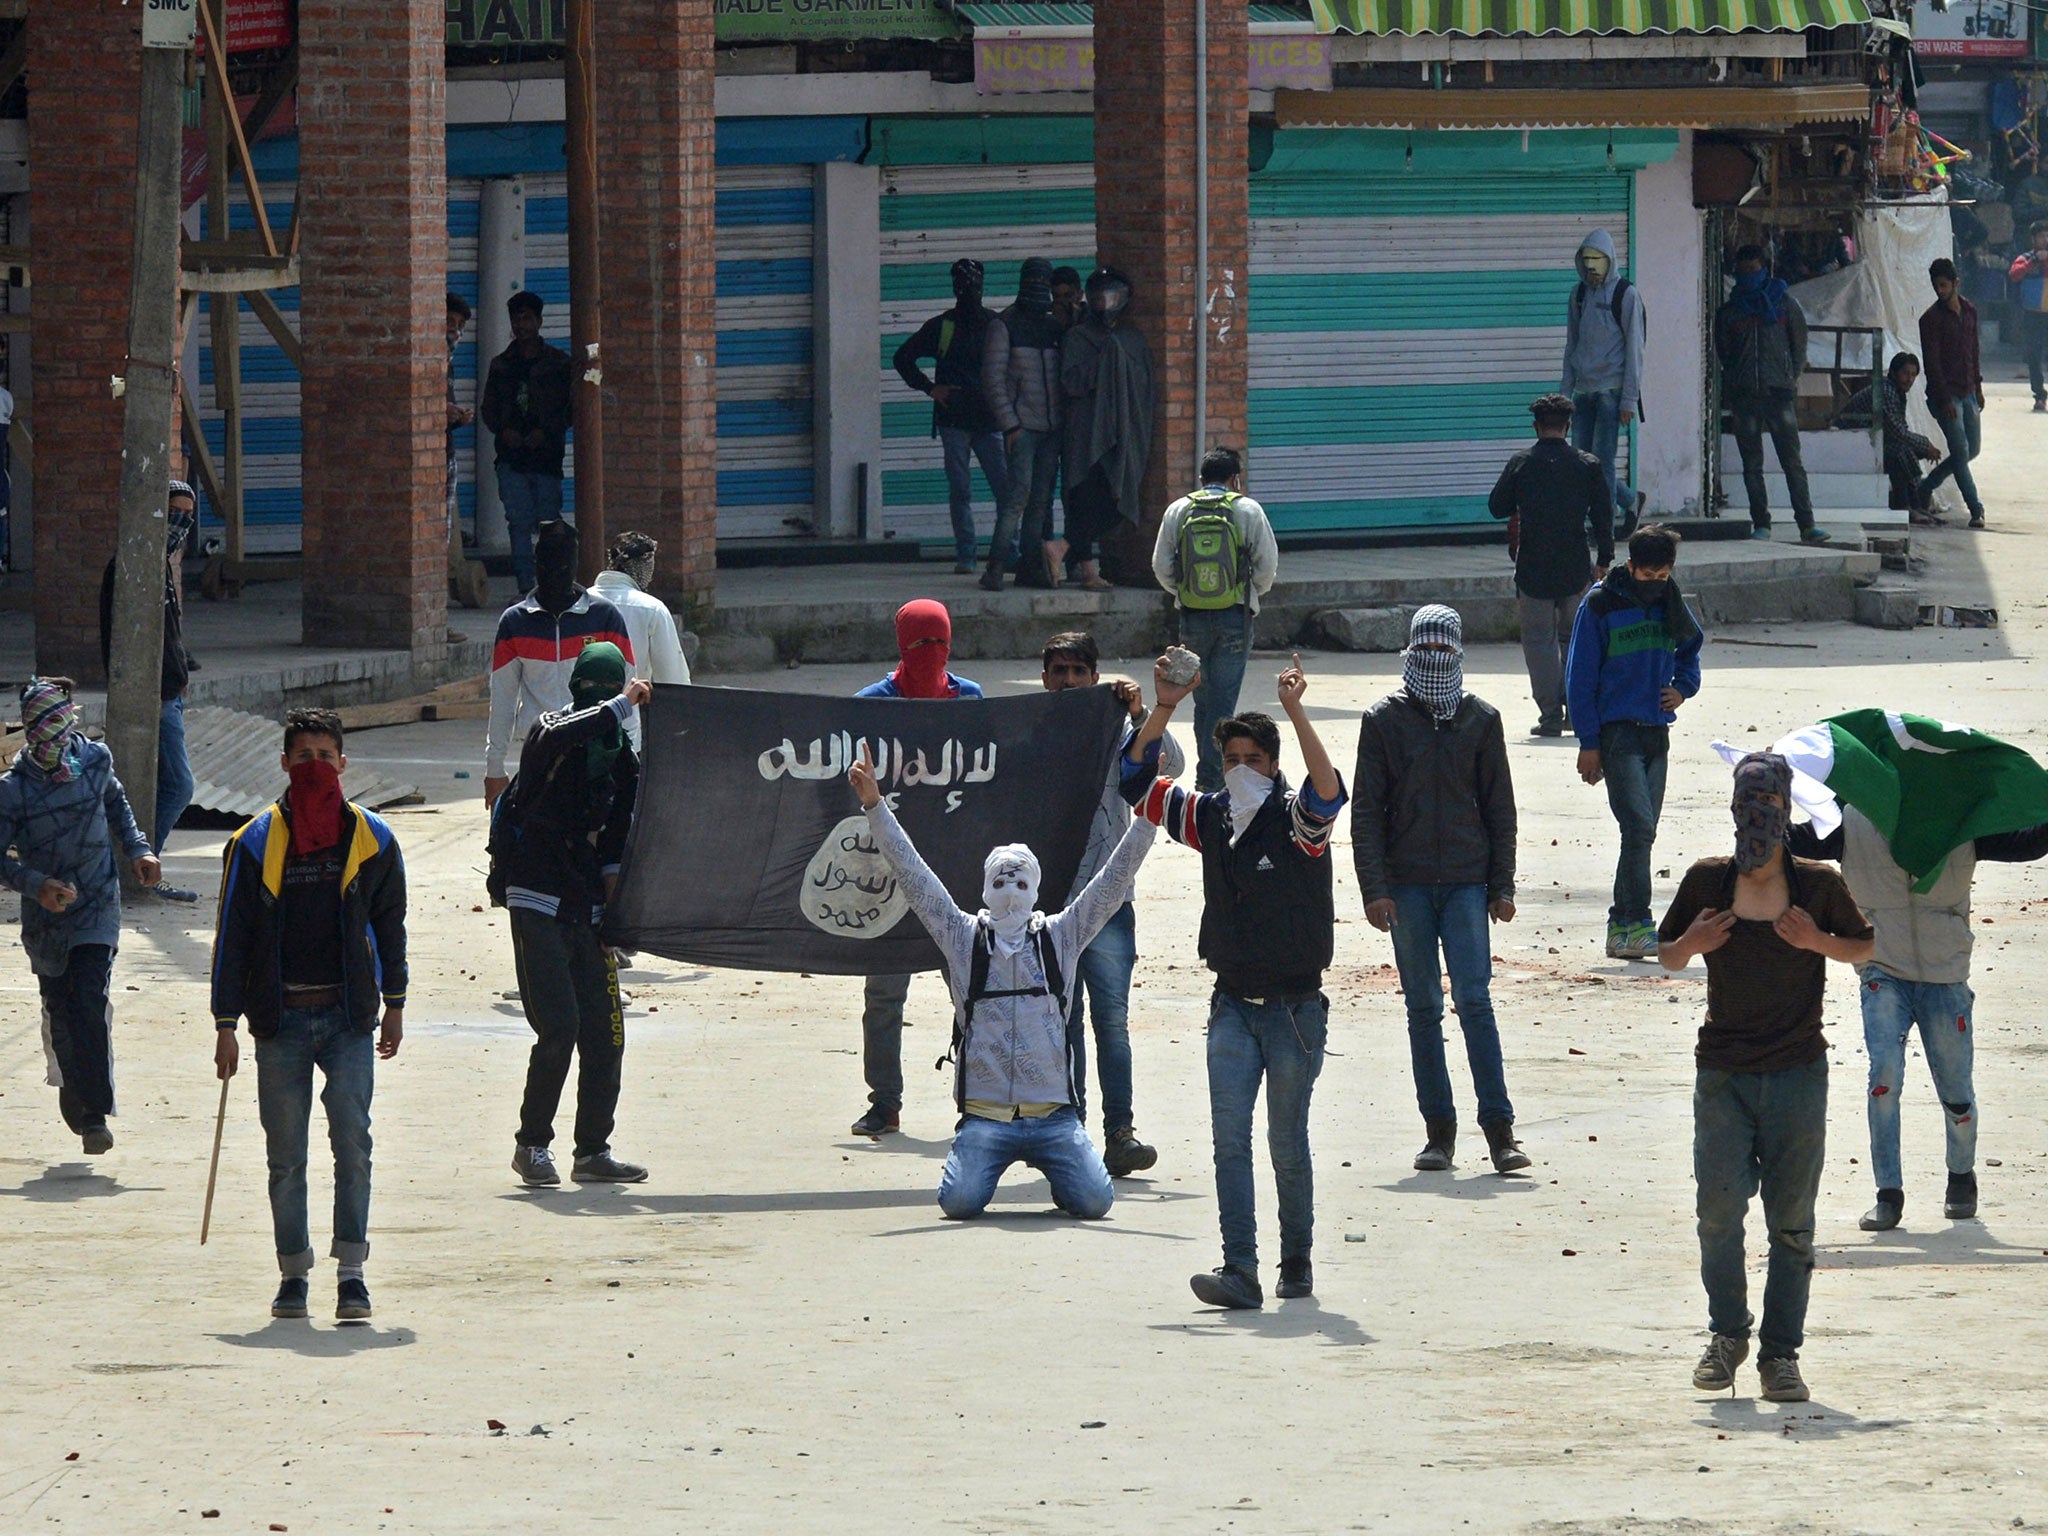 Kashmiri Muslim protesters hold Isis and Pakistani flags as they shout anti-India slogans during clashes in downtown Srinagar on 8 April, 2016